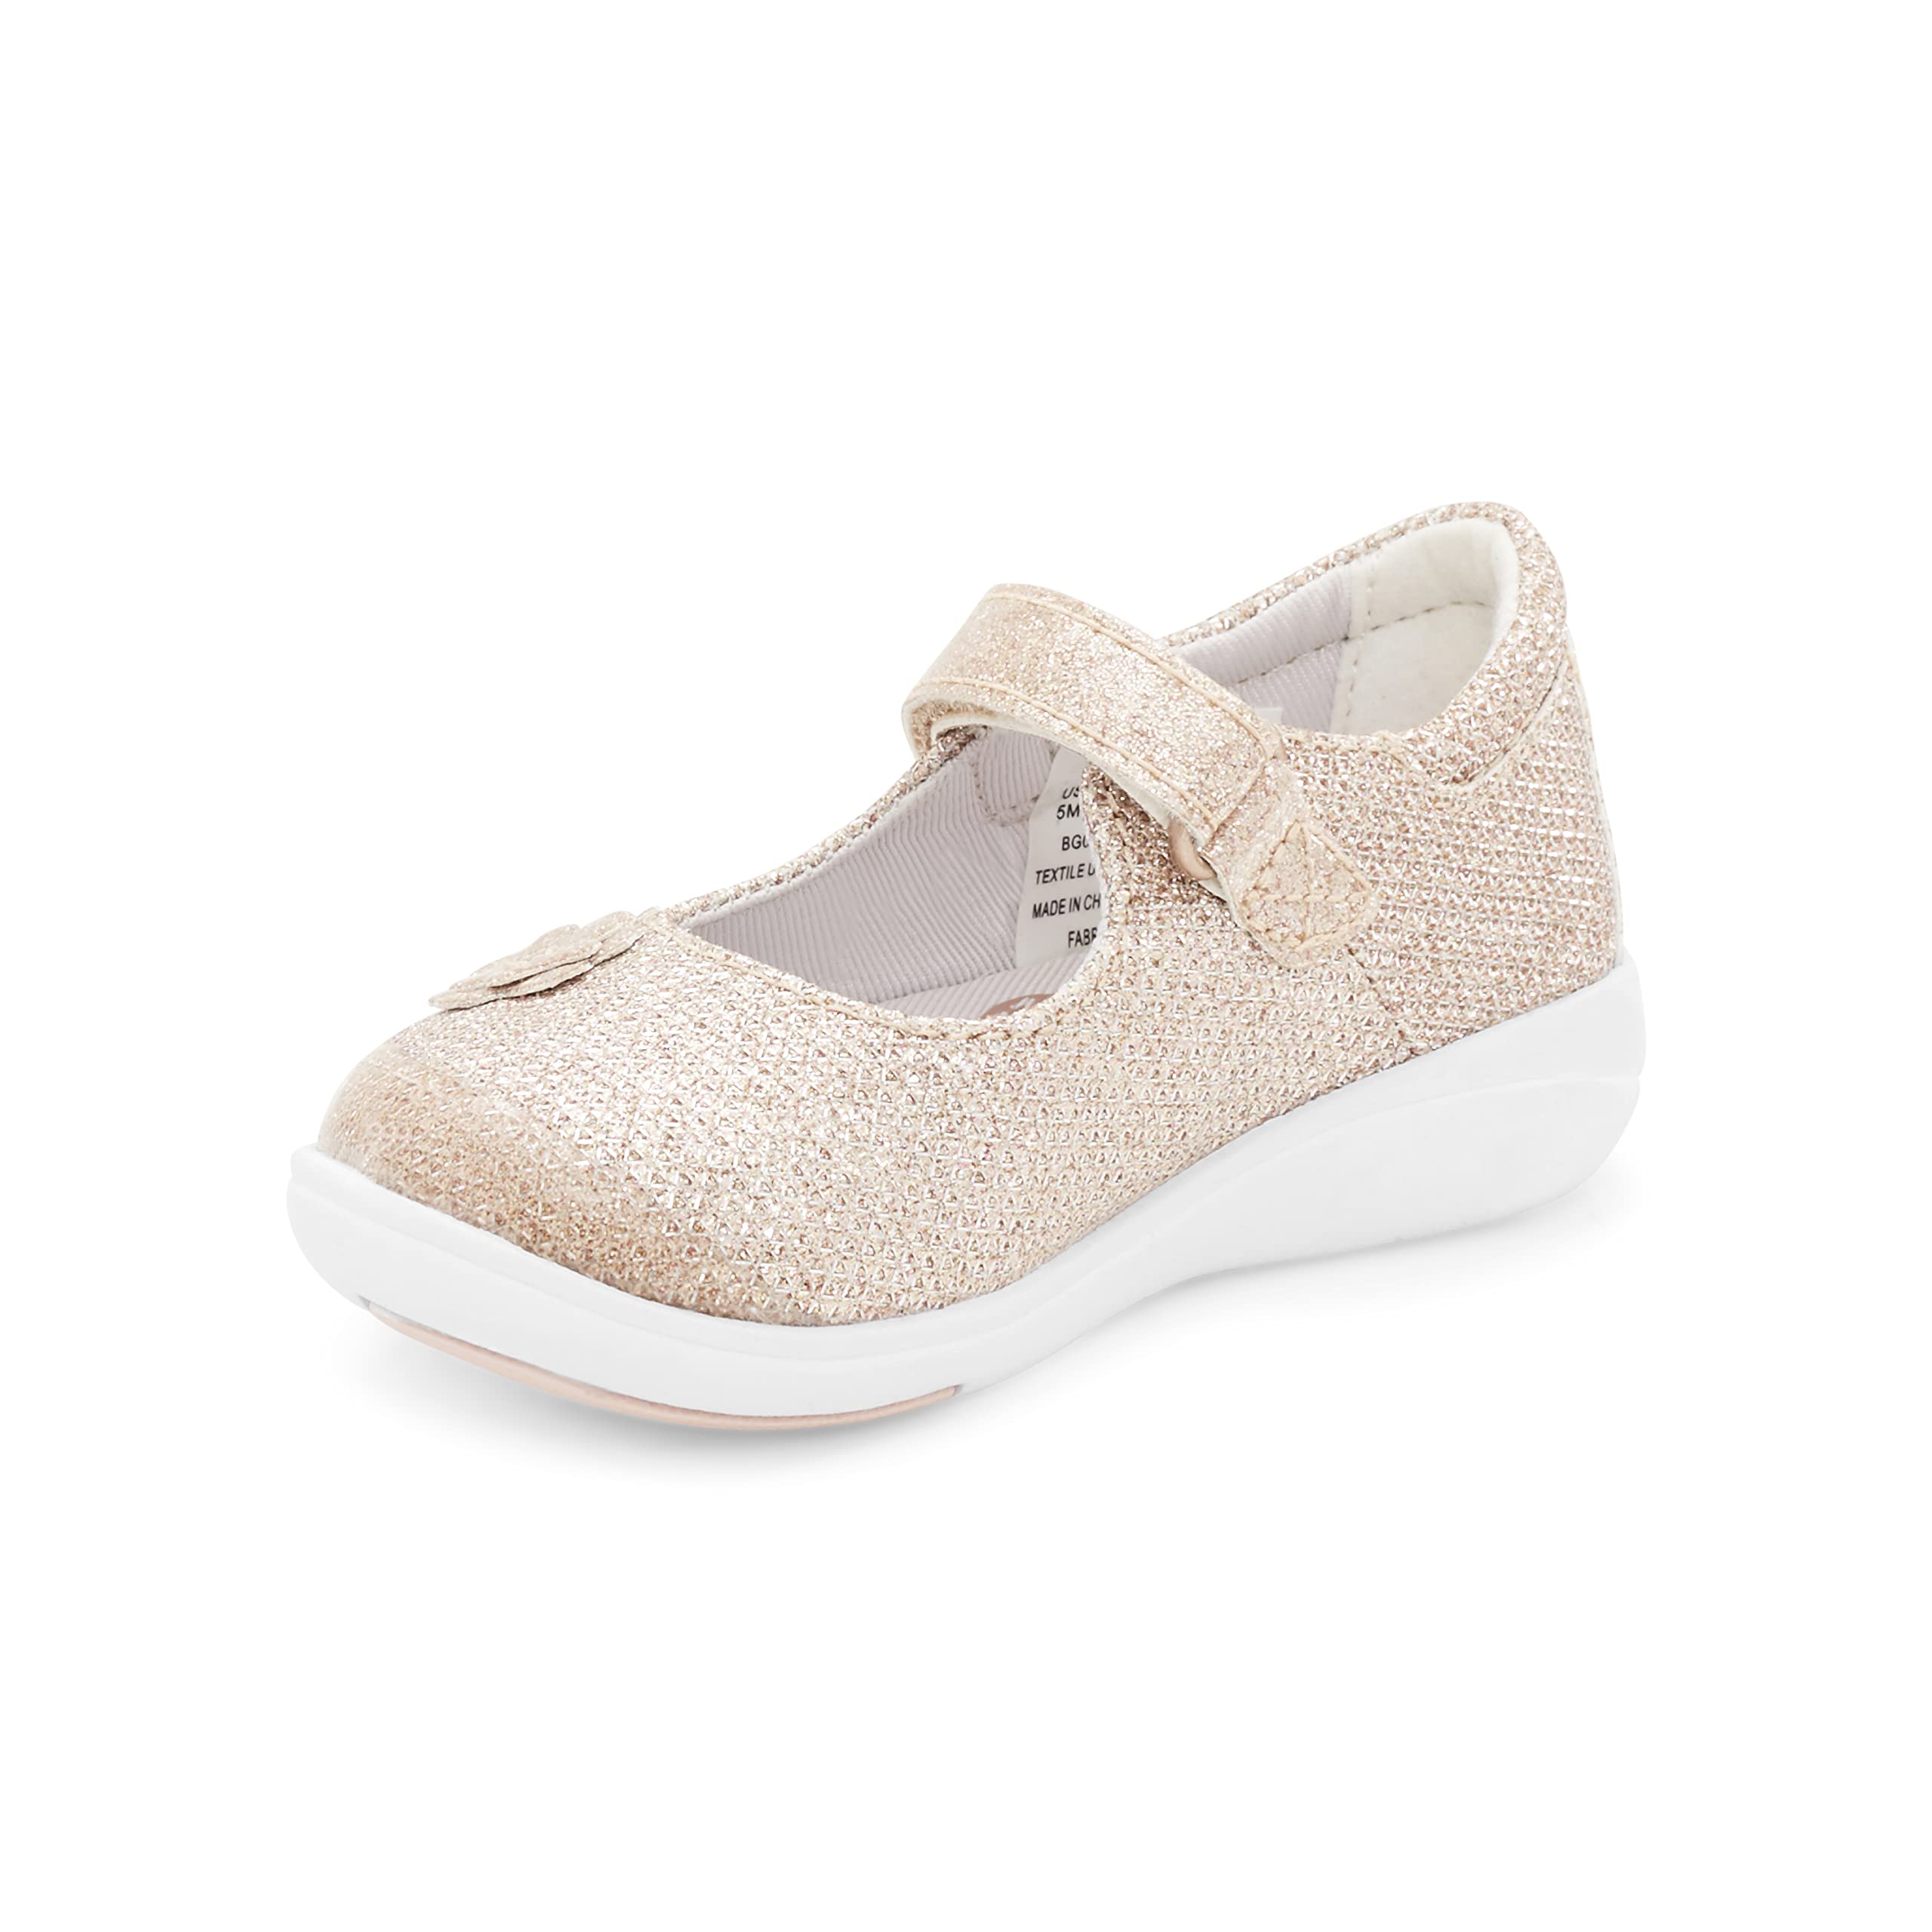 Stride Rite Girl's Holly-Adaptable Mary Jane Flat